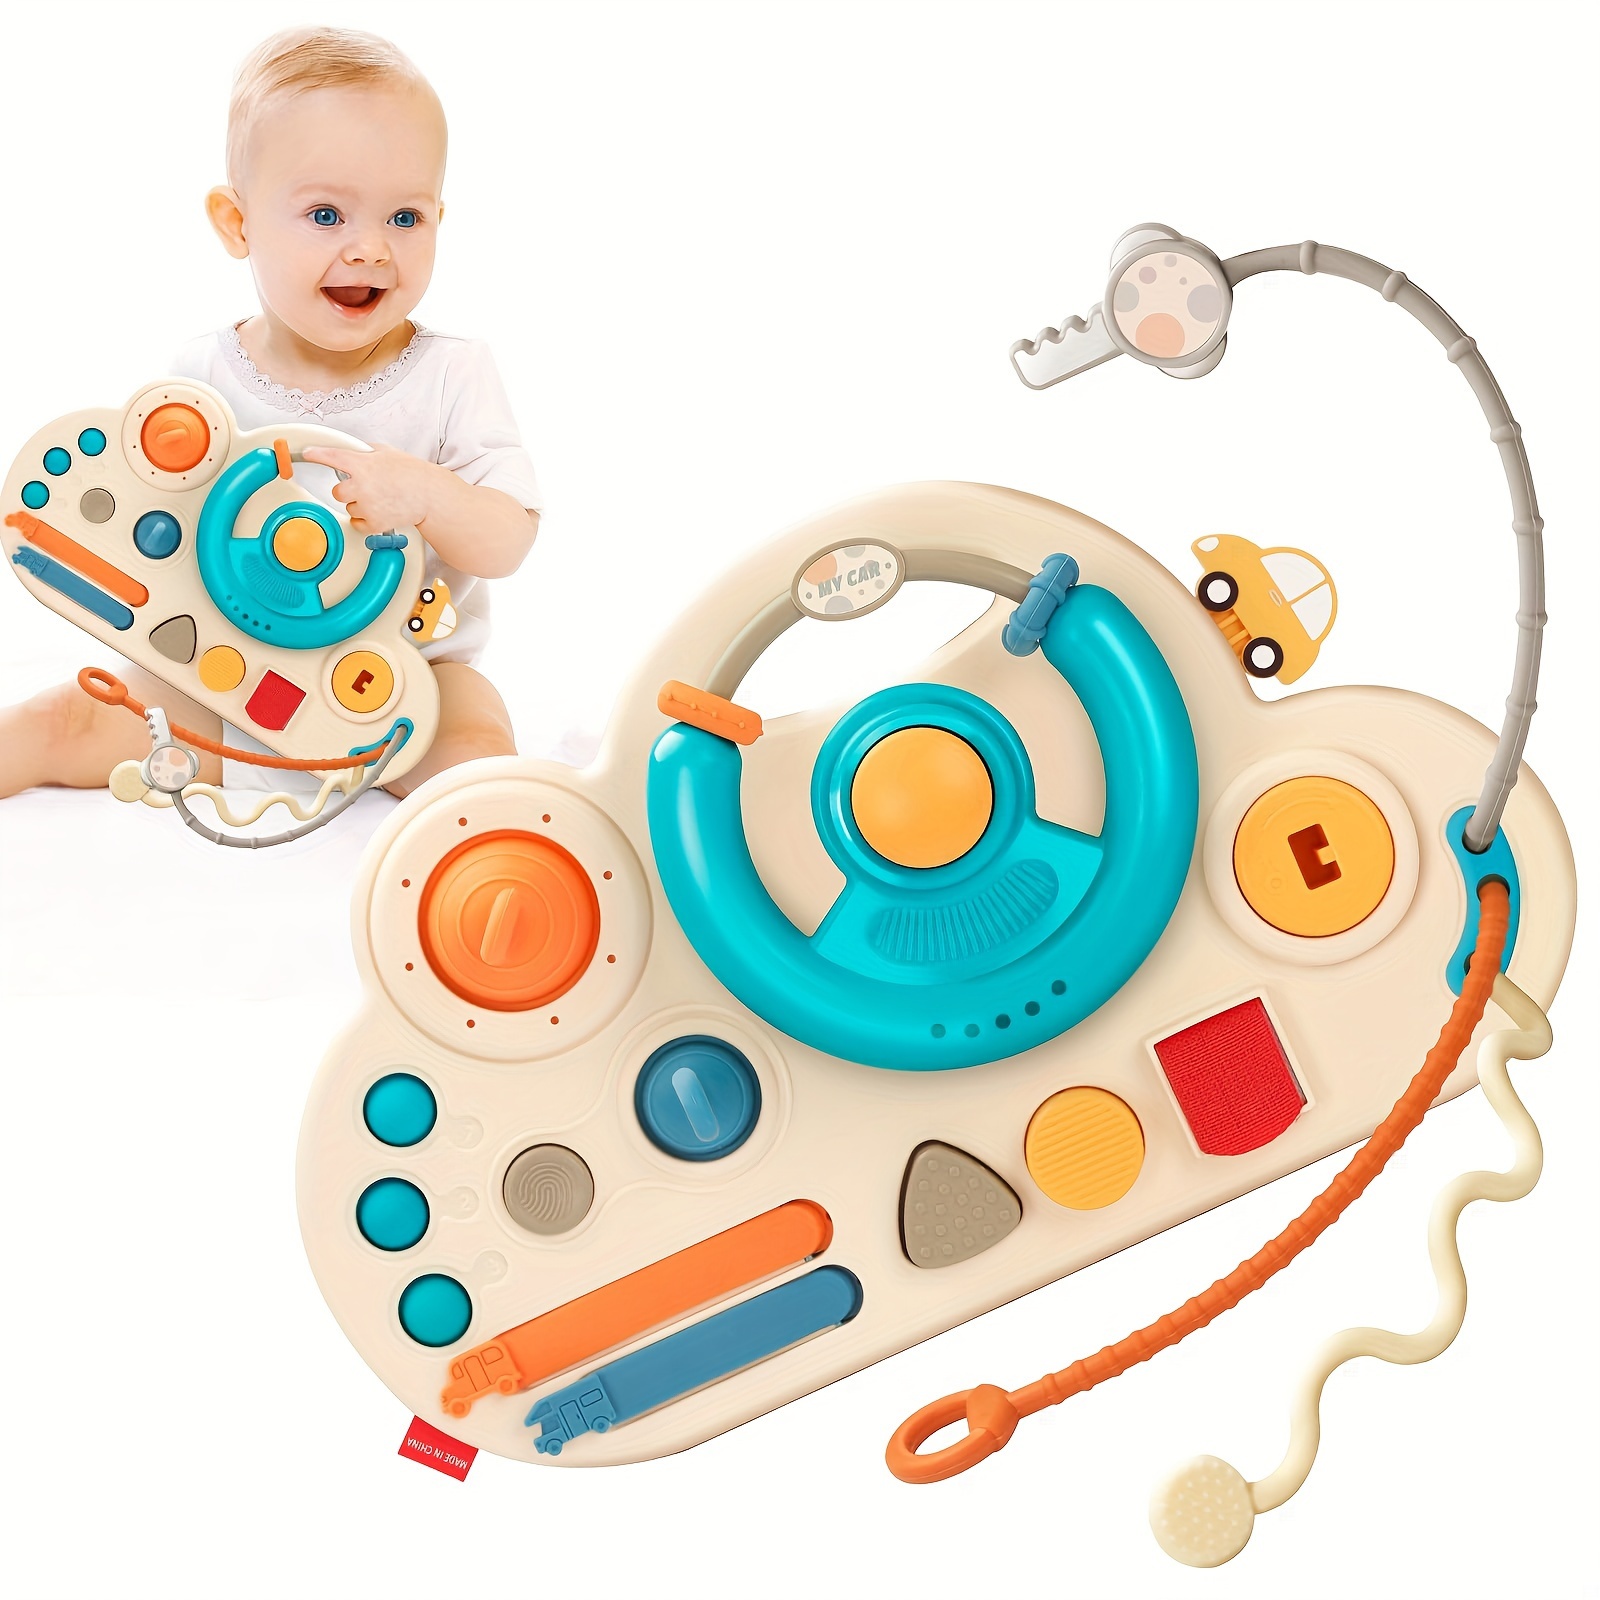 

Montessori Early Education Busy Board For Infants & Toddlers 0-3 Years - Multifunctional Simulation Steering Wheel Playset, Plastic Baby Toy For Learning To Drive, Random Color Details